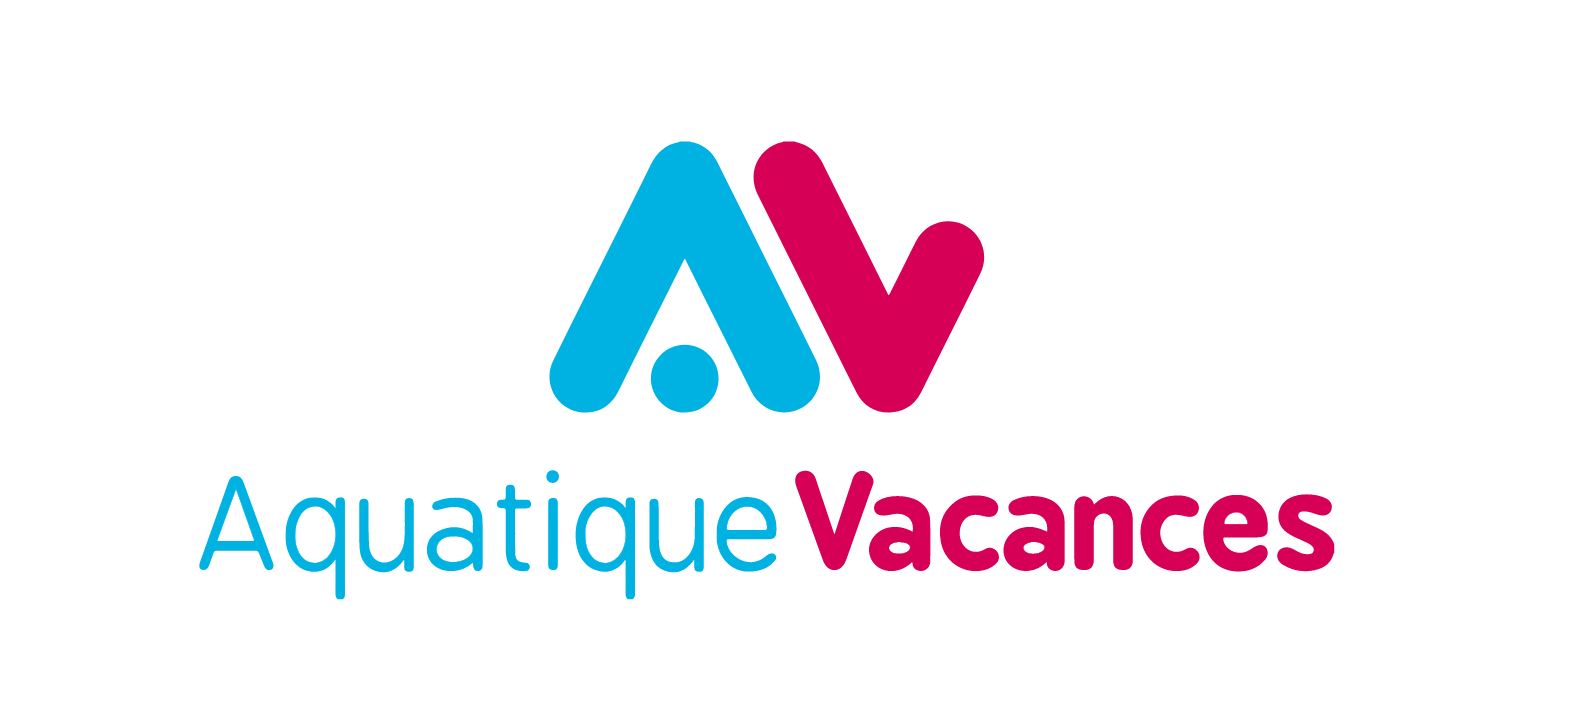 You are currently viewing Aquatique vacances